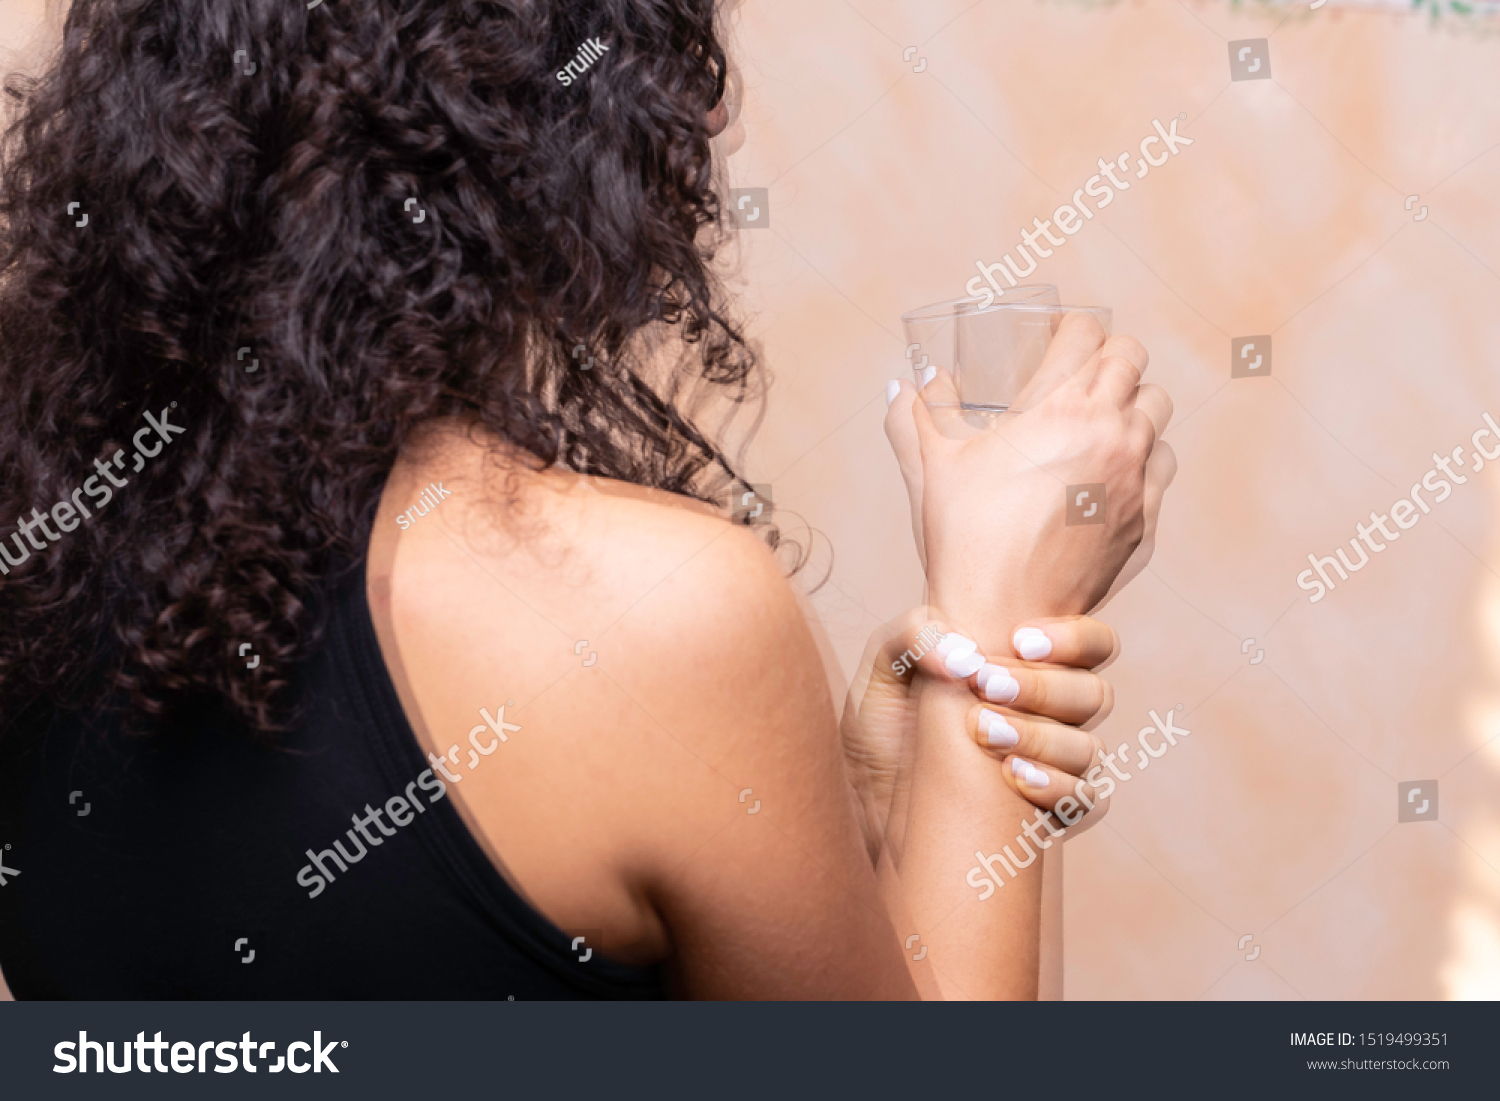 A closeup and rear view of a girl suffering from Parkinson's disease, violently trembling and holding her wrist trying to be steady, involuntary movements symptomatic of the disease. #1519499351